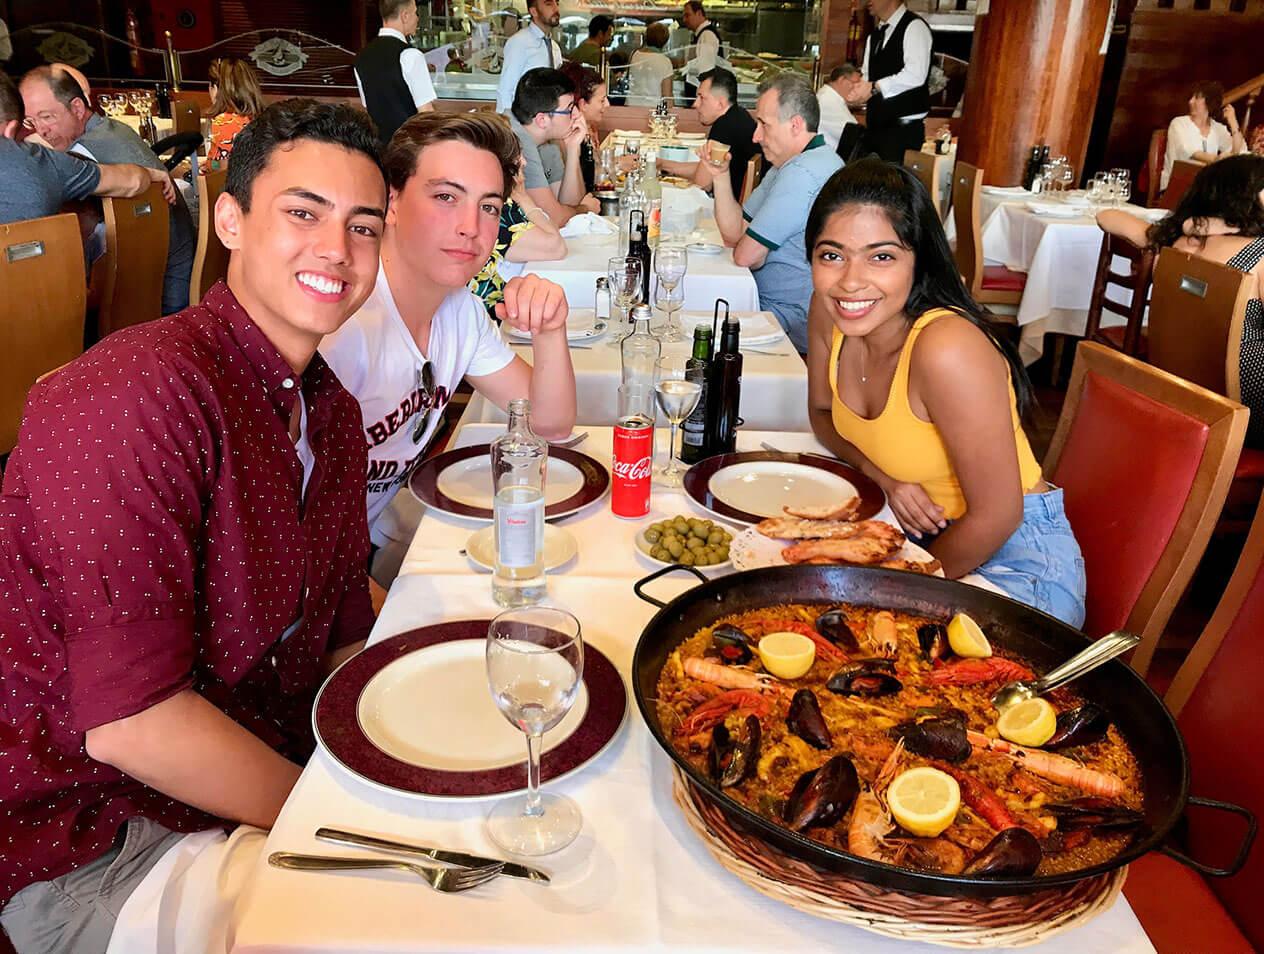 Creighton student Maya Mathews at a restaurant in Spain during her study abroad experience